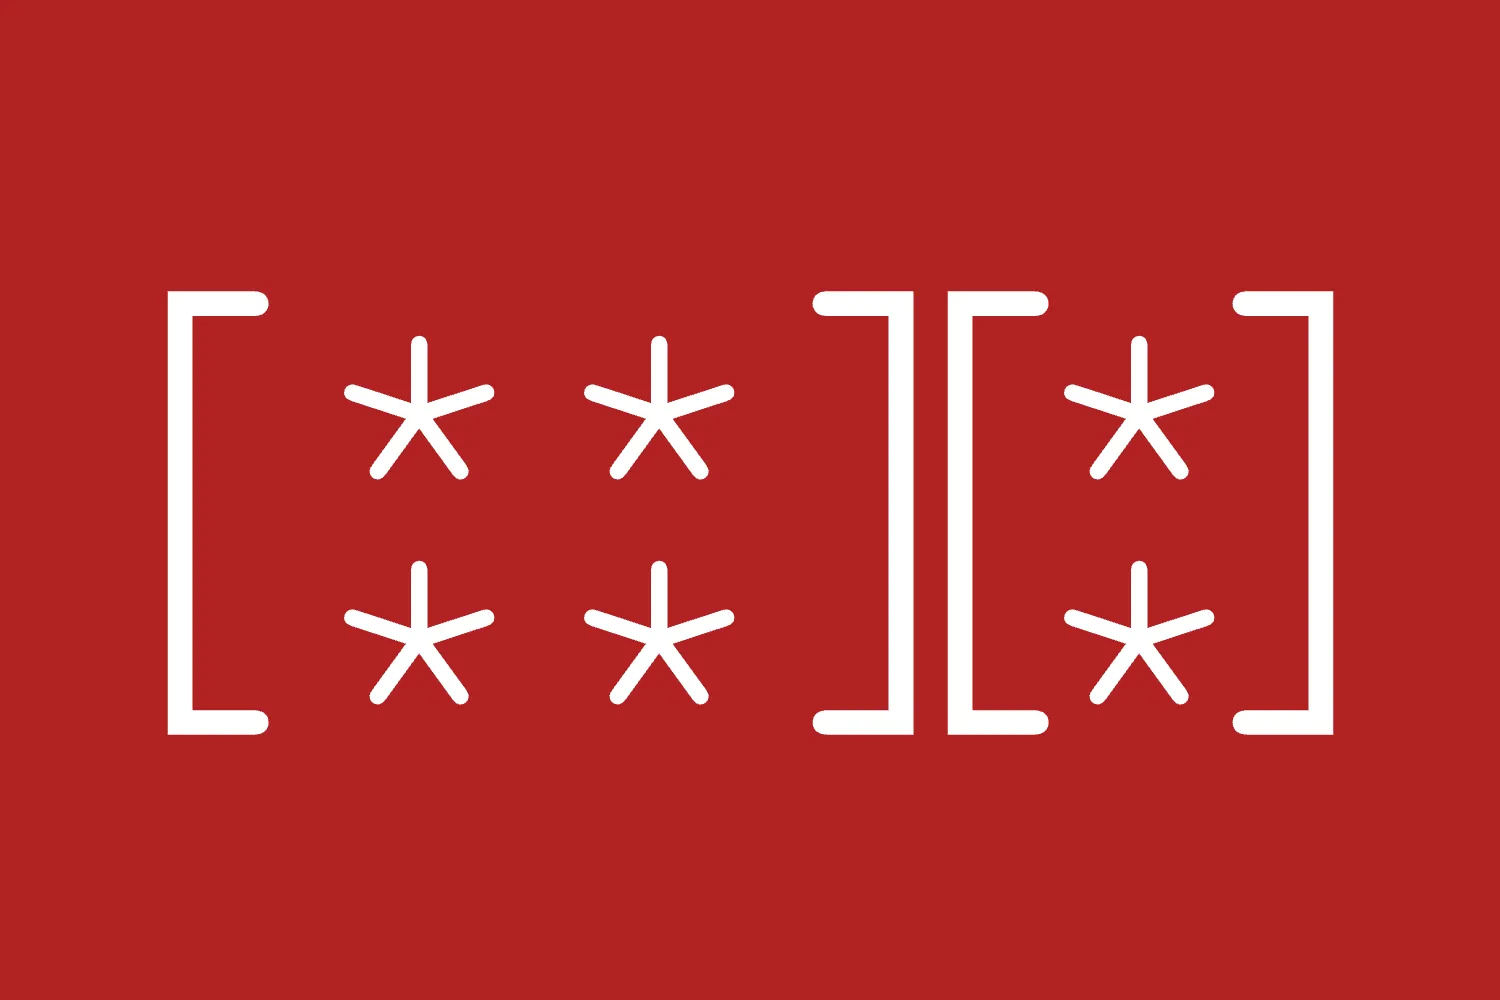 A matrix and a vector both filled with asterisks. The math is written in white on a red background.